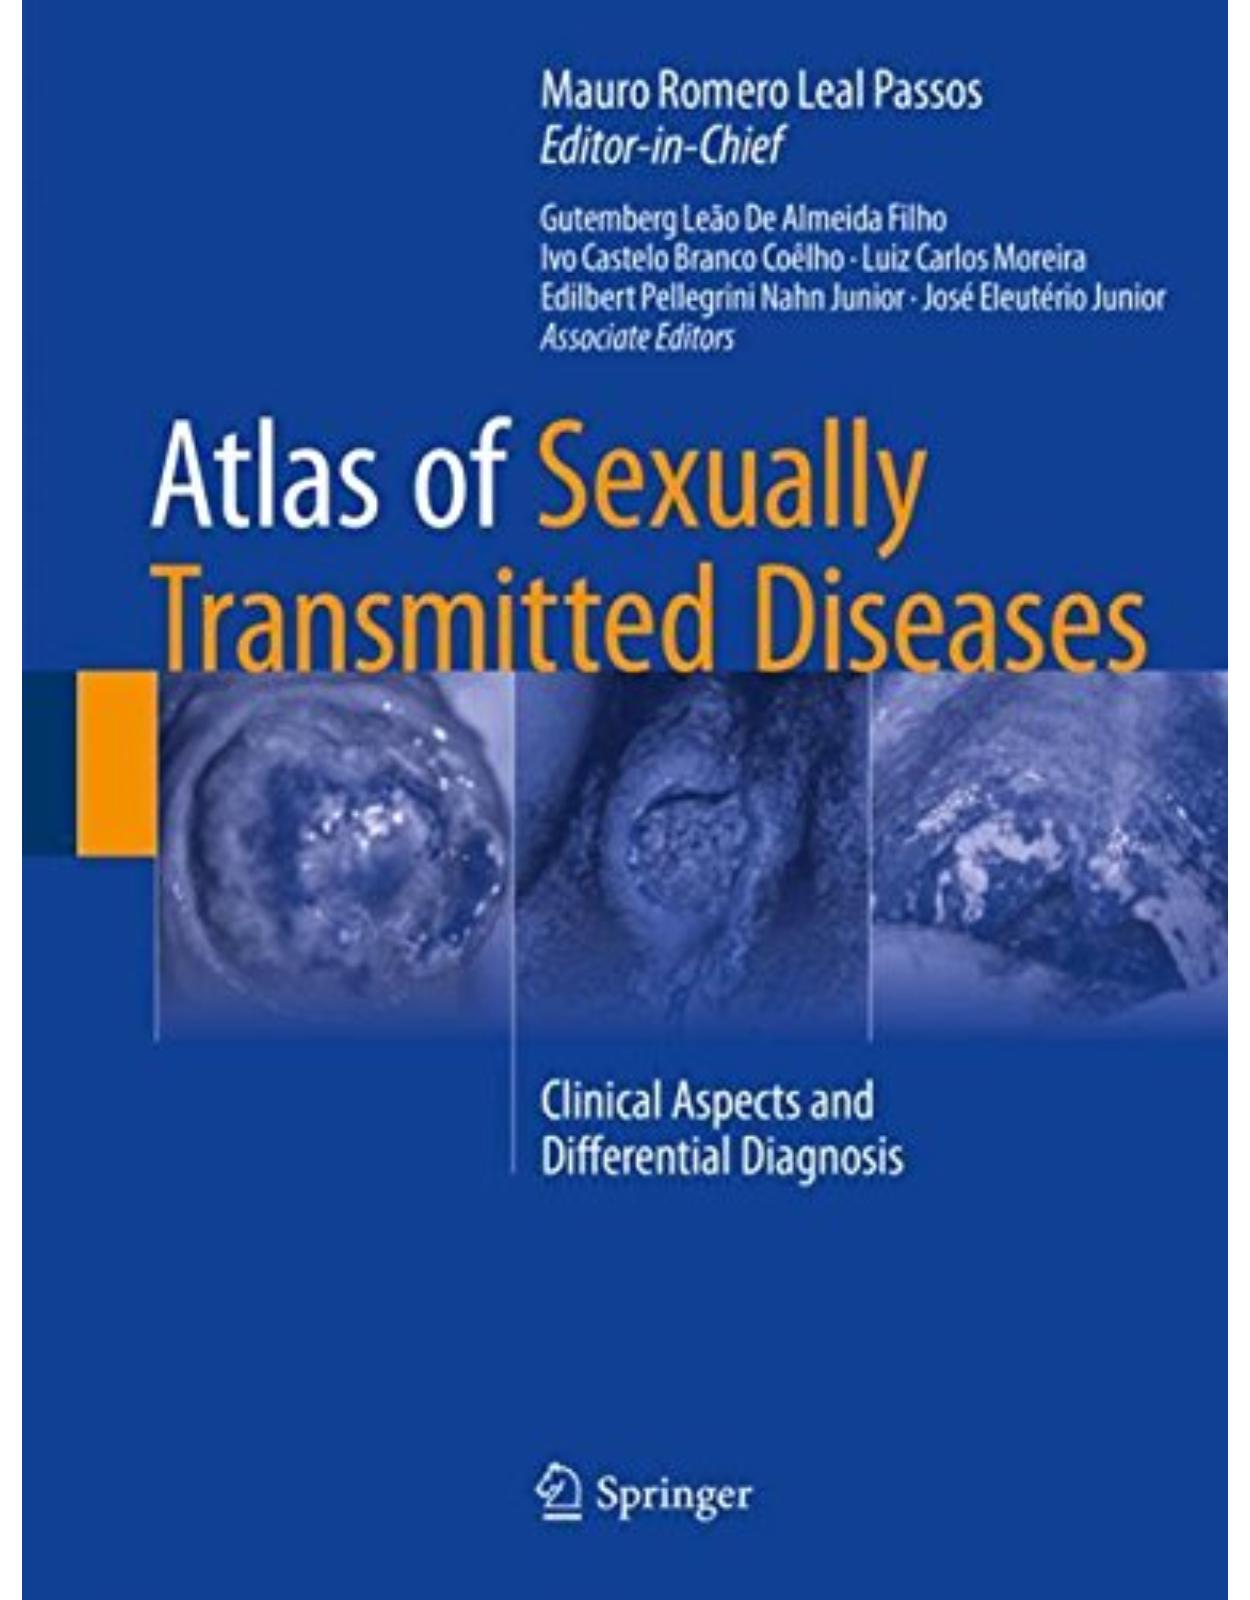 Atlas of Sexually Transmitted Diseases: Clinical Aspects and Differential Diagnosis 